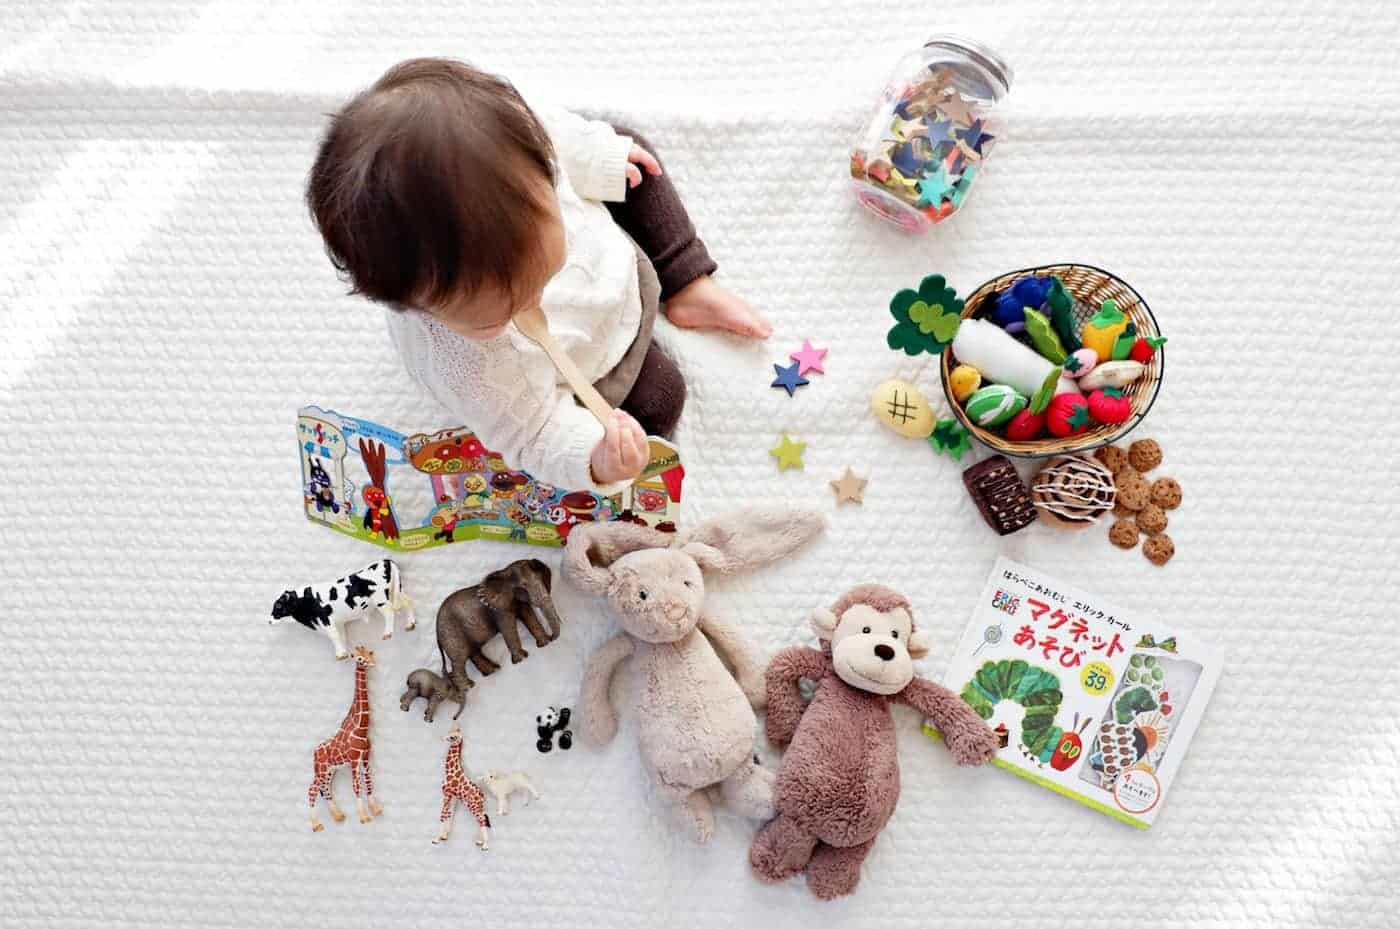 Adorable Kid Playing with Toys